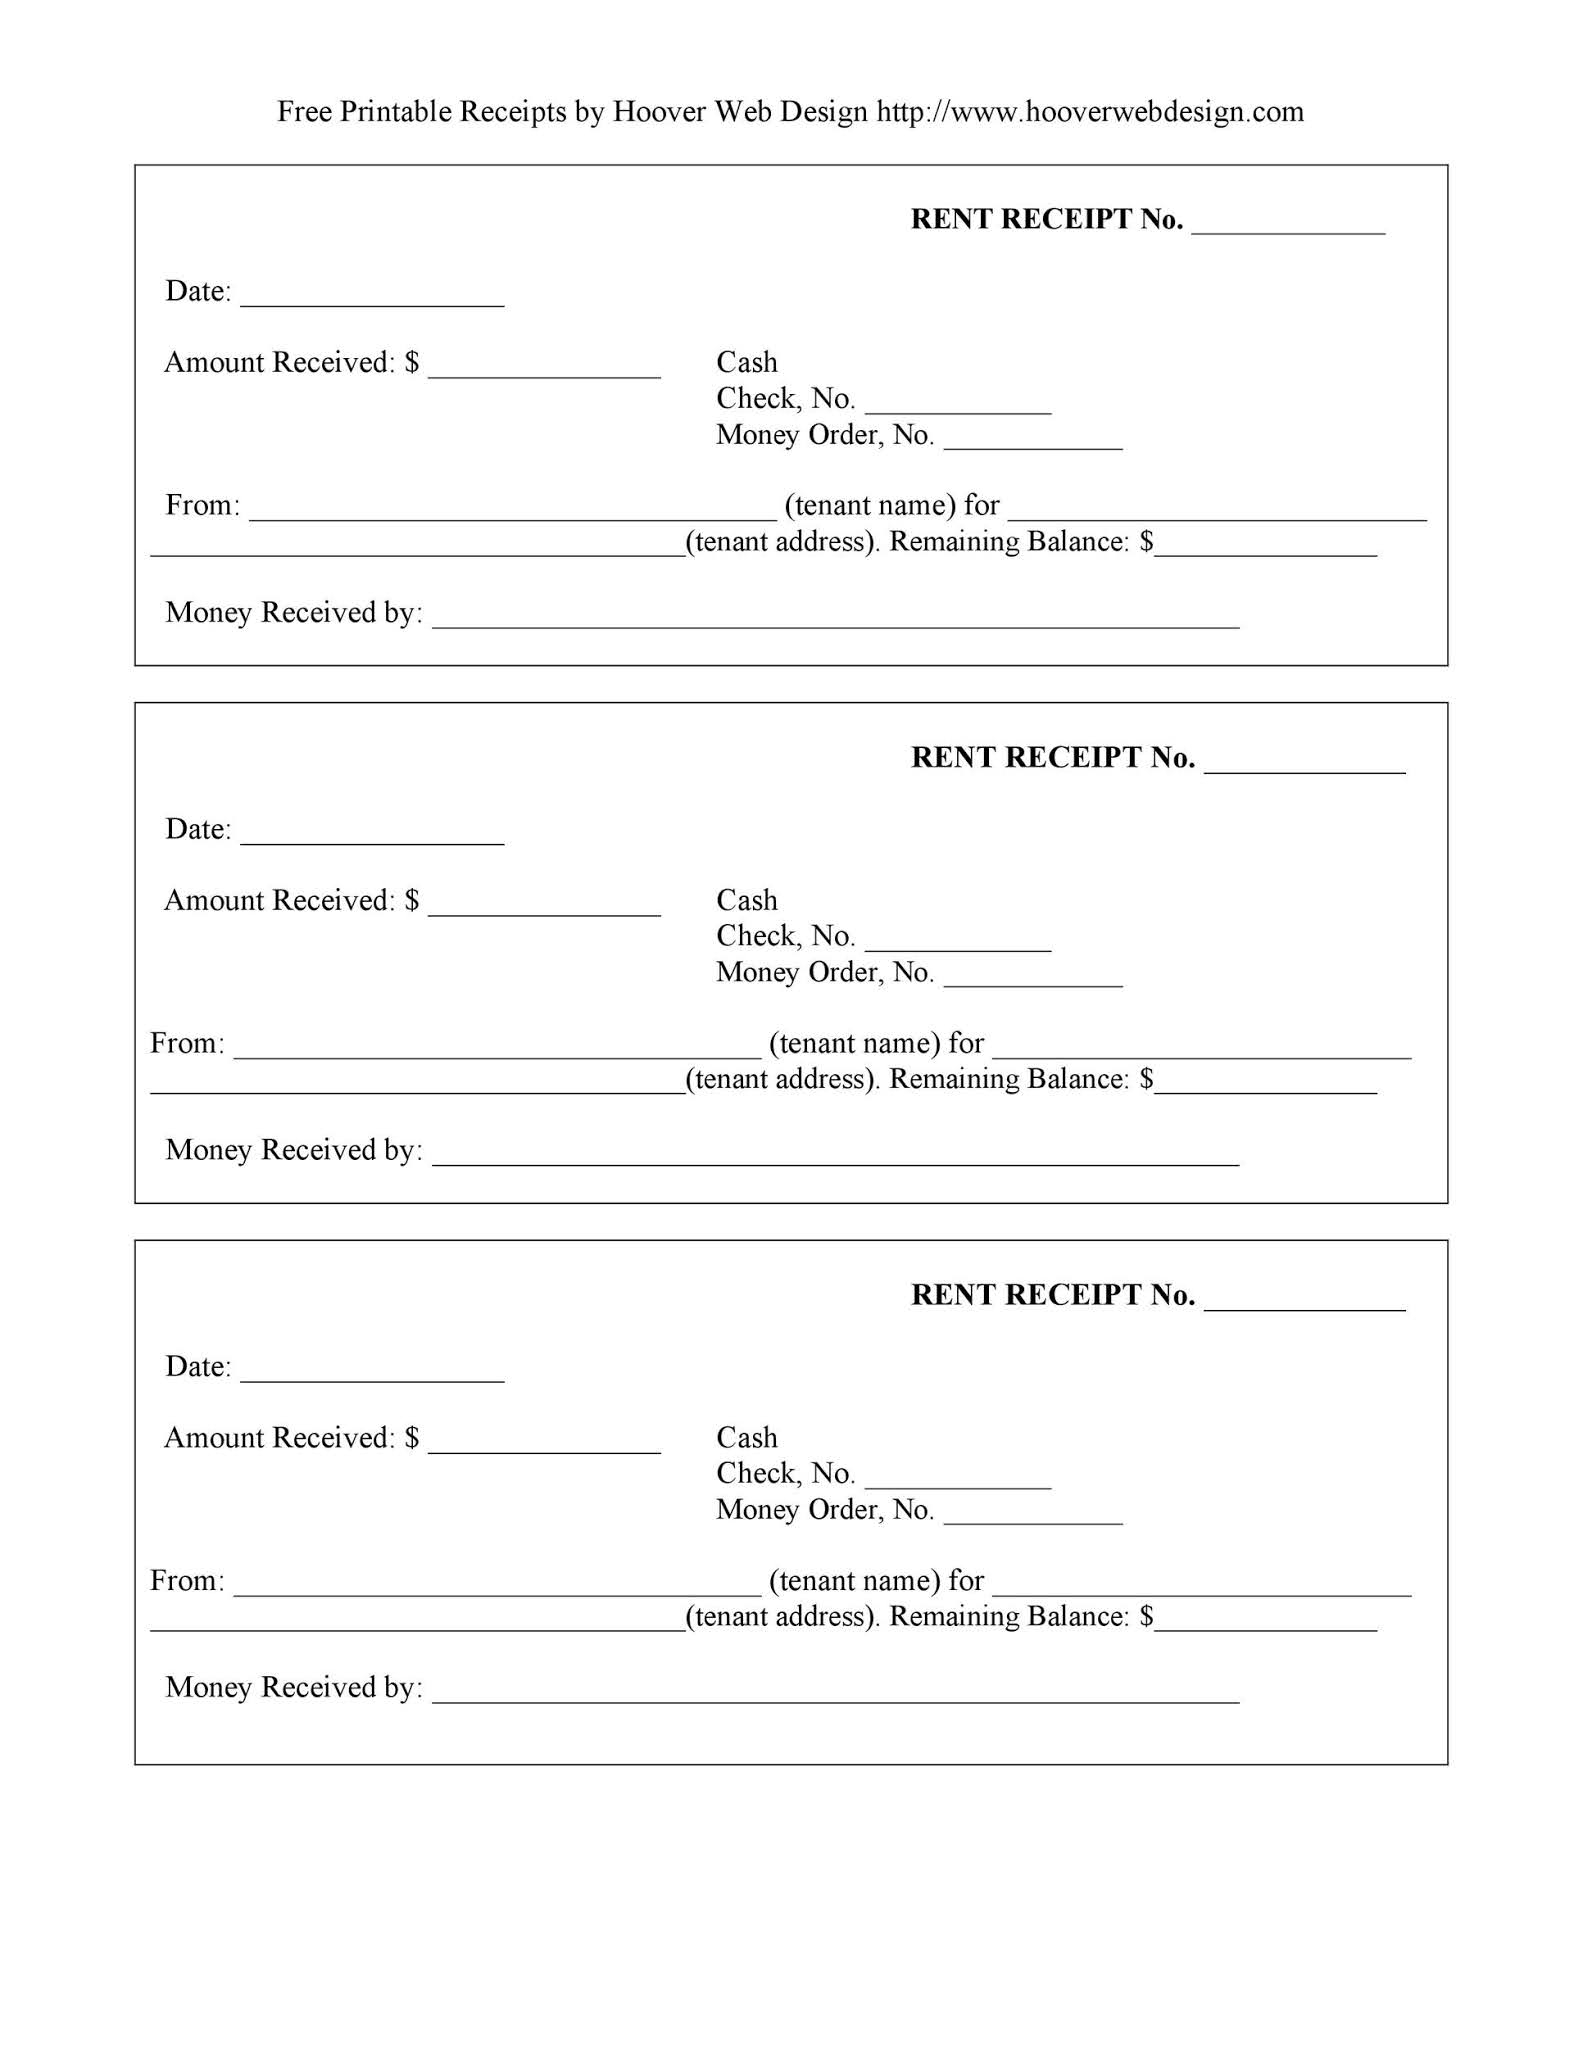 rental-receipt-template-download-free-documents-for-pdf-word-and-excel